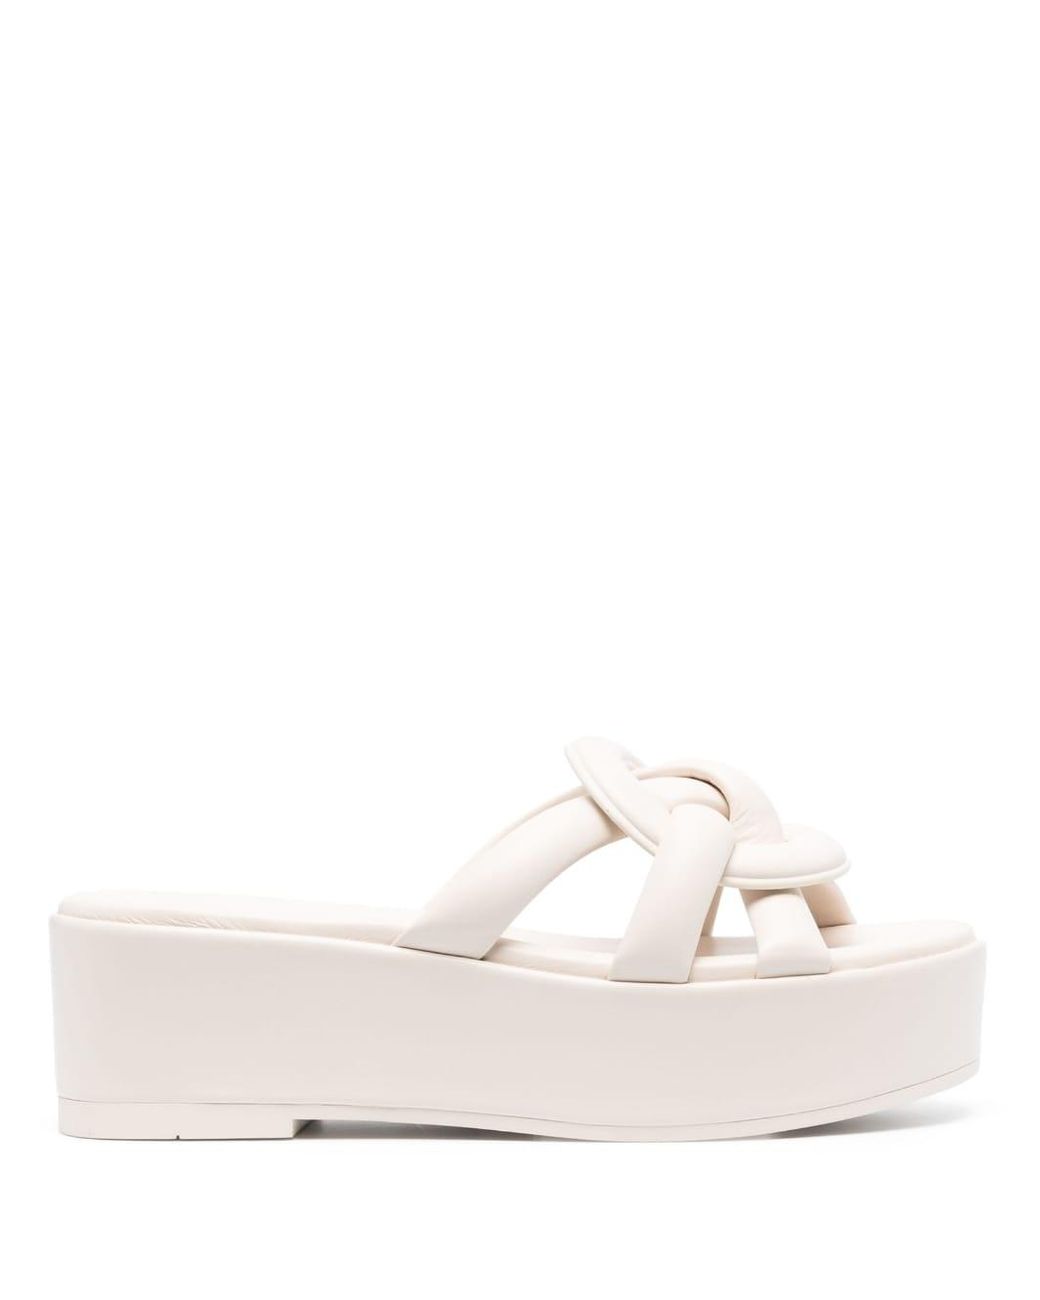 COACH Everette Leather Platform Sandals in White | Lyst